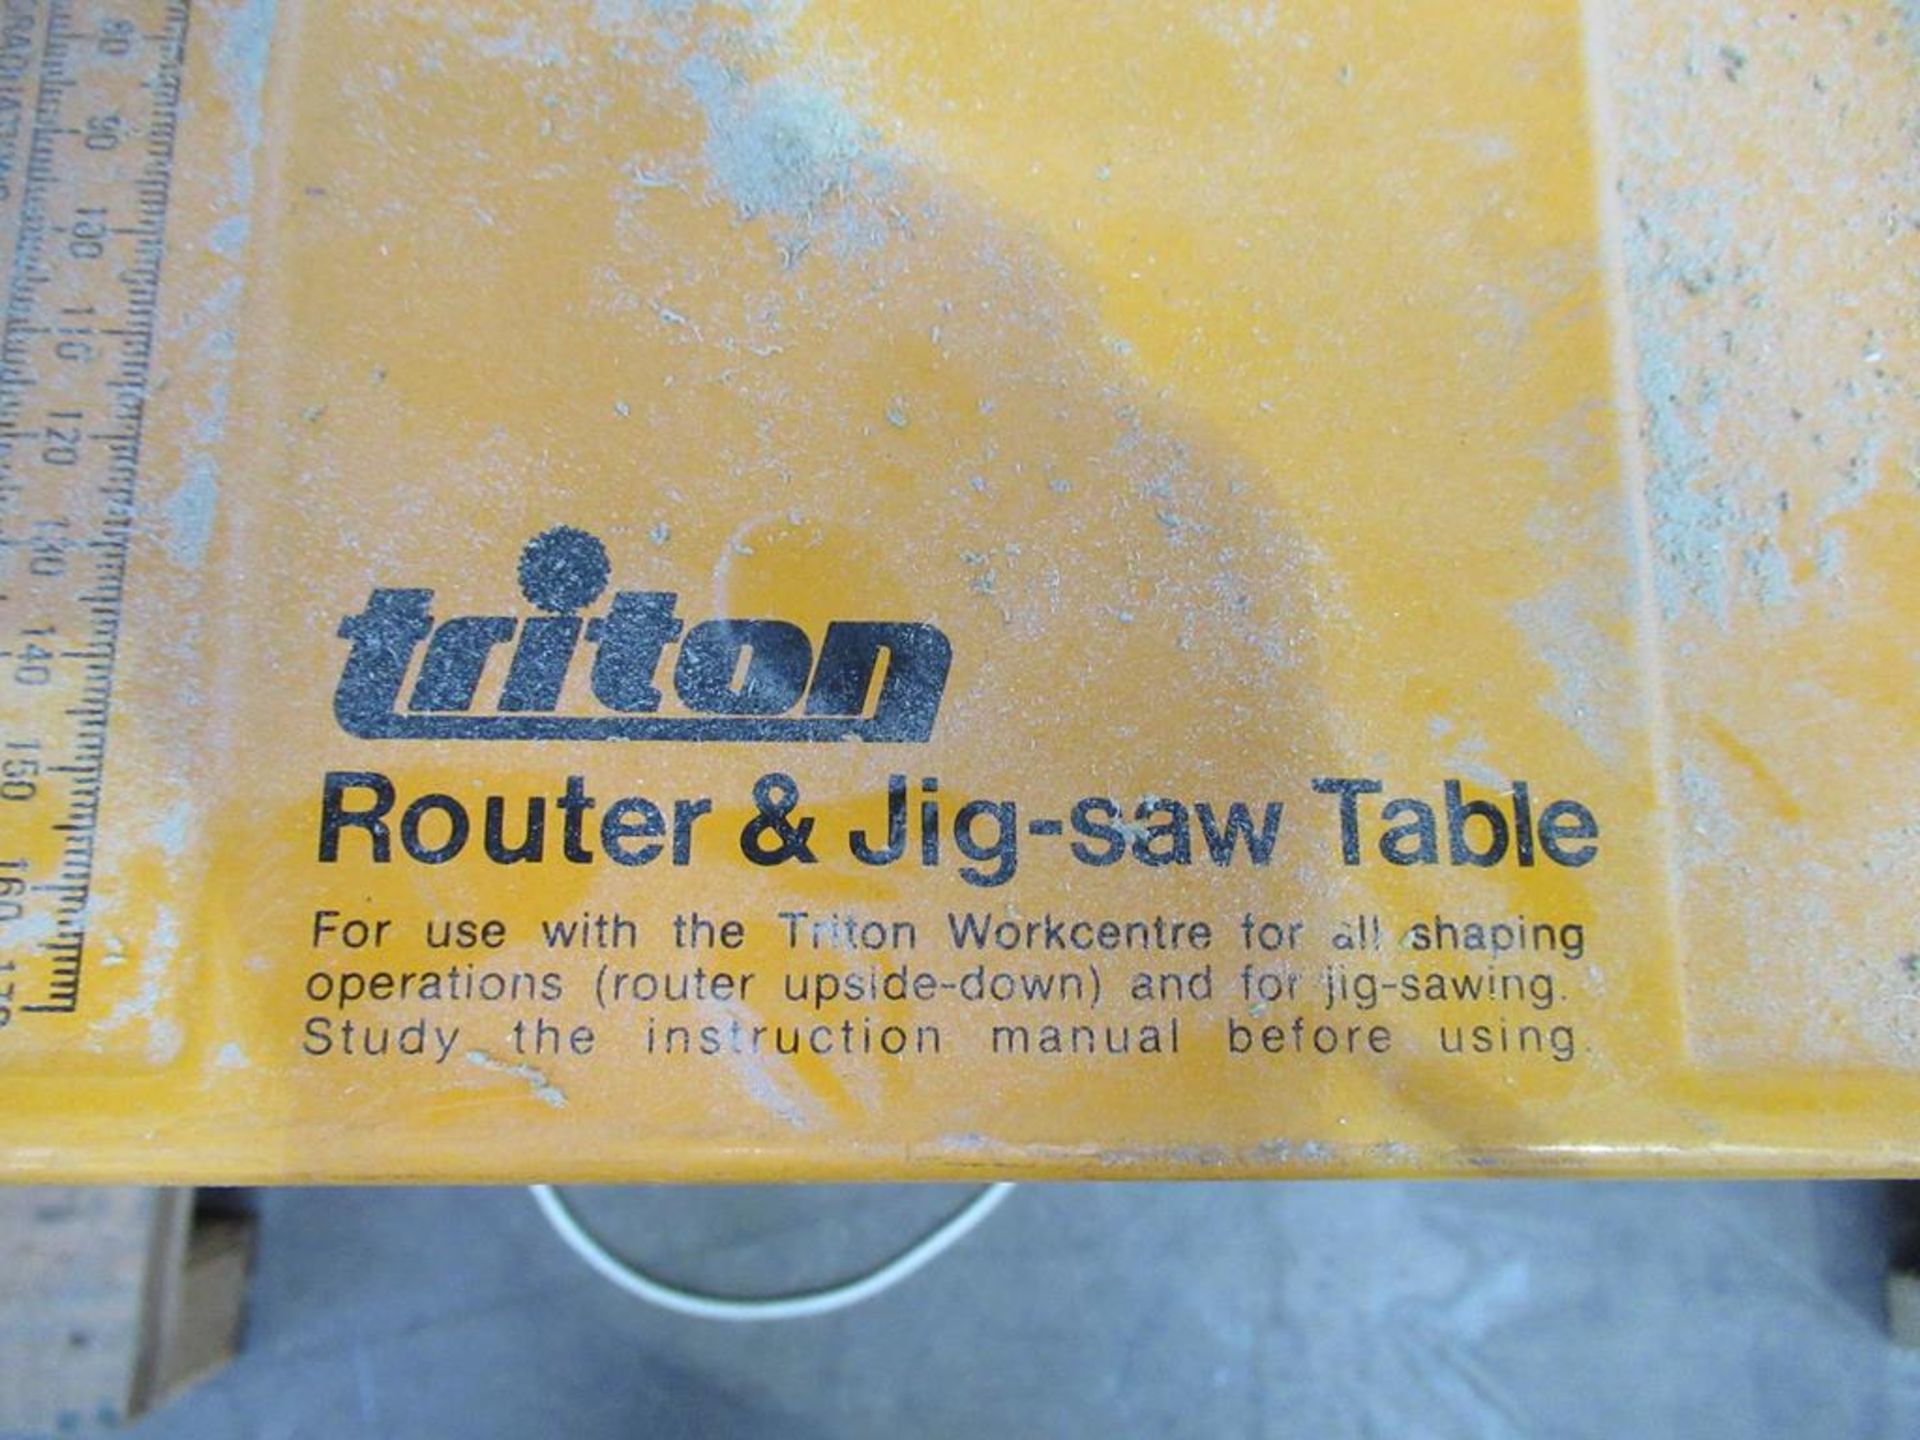 Triton Router and Jig-Saw Table - Image 2 of 4